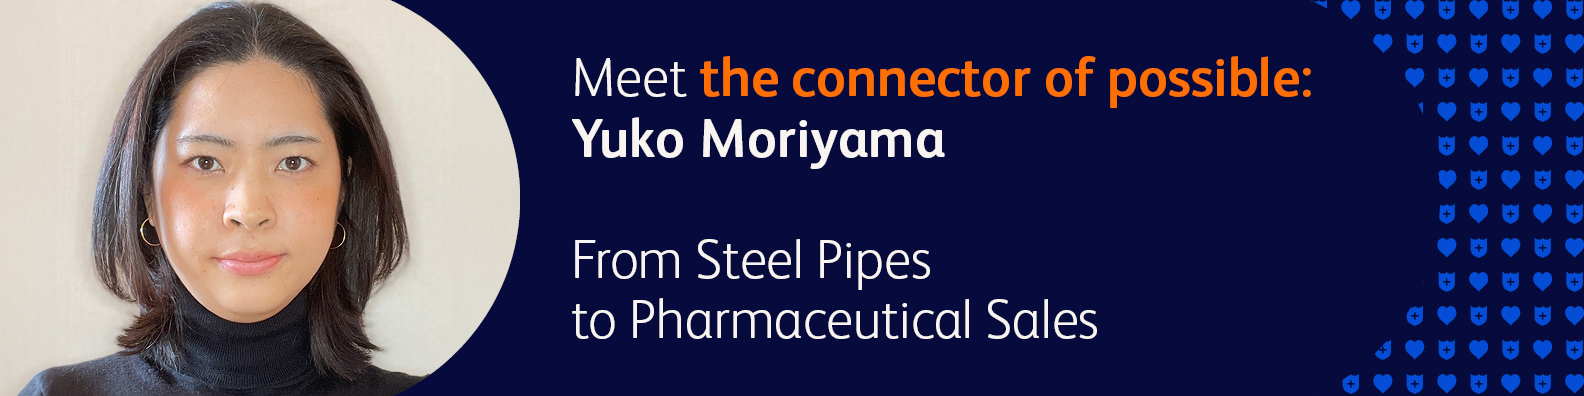 Yuko Moriyama, Key Account Manager in Pharmaceutical Sales at BD and a Team Leader